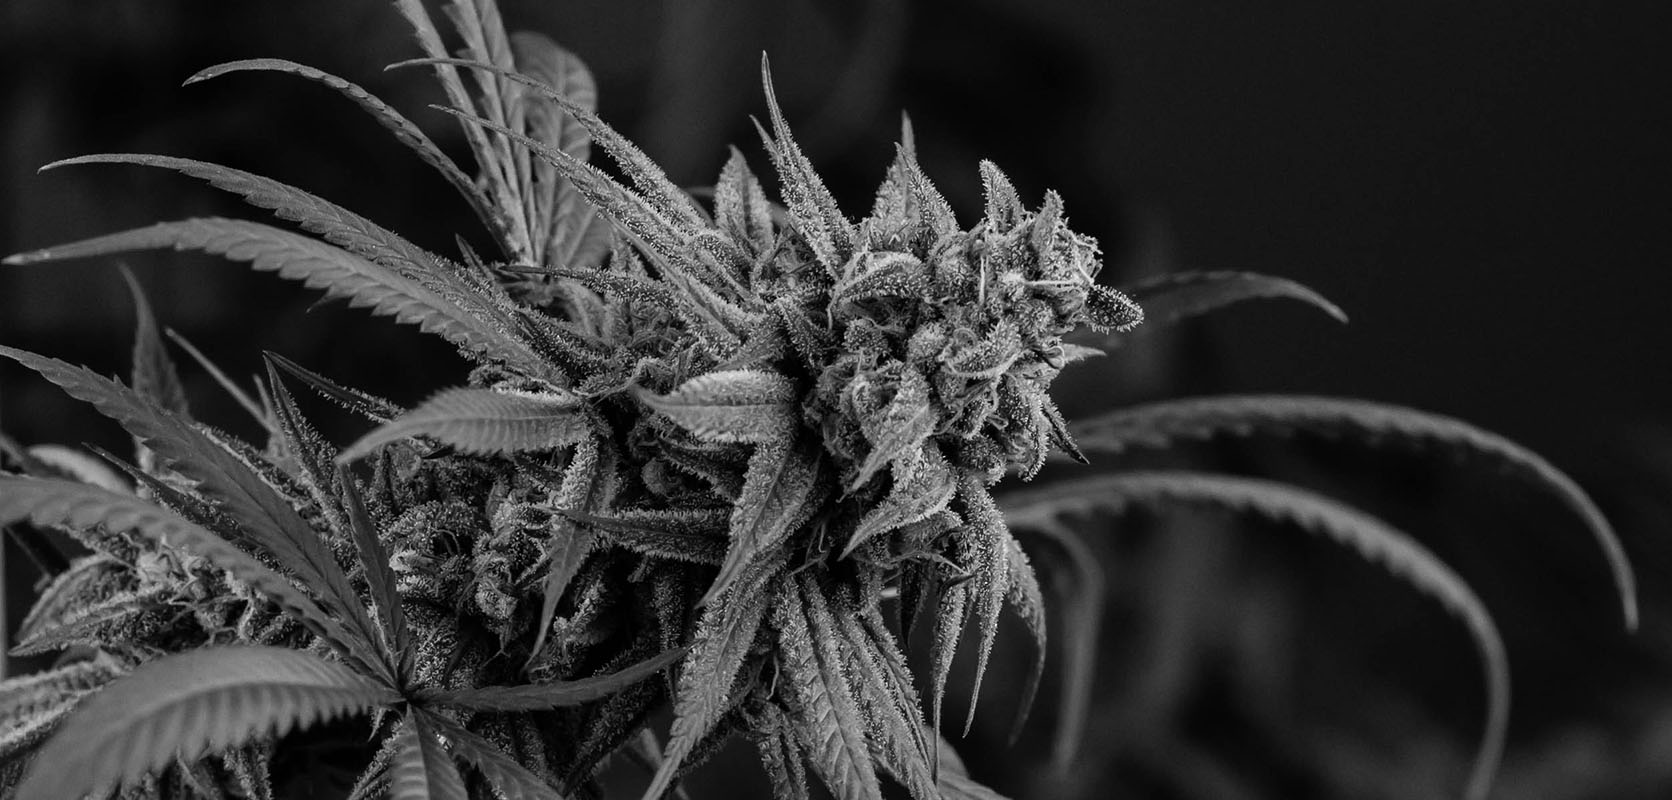 Black and white image of a Sweet OG Kush cannabis plant from West Coast Cannabis online dispensary to buy weed online in Canada.